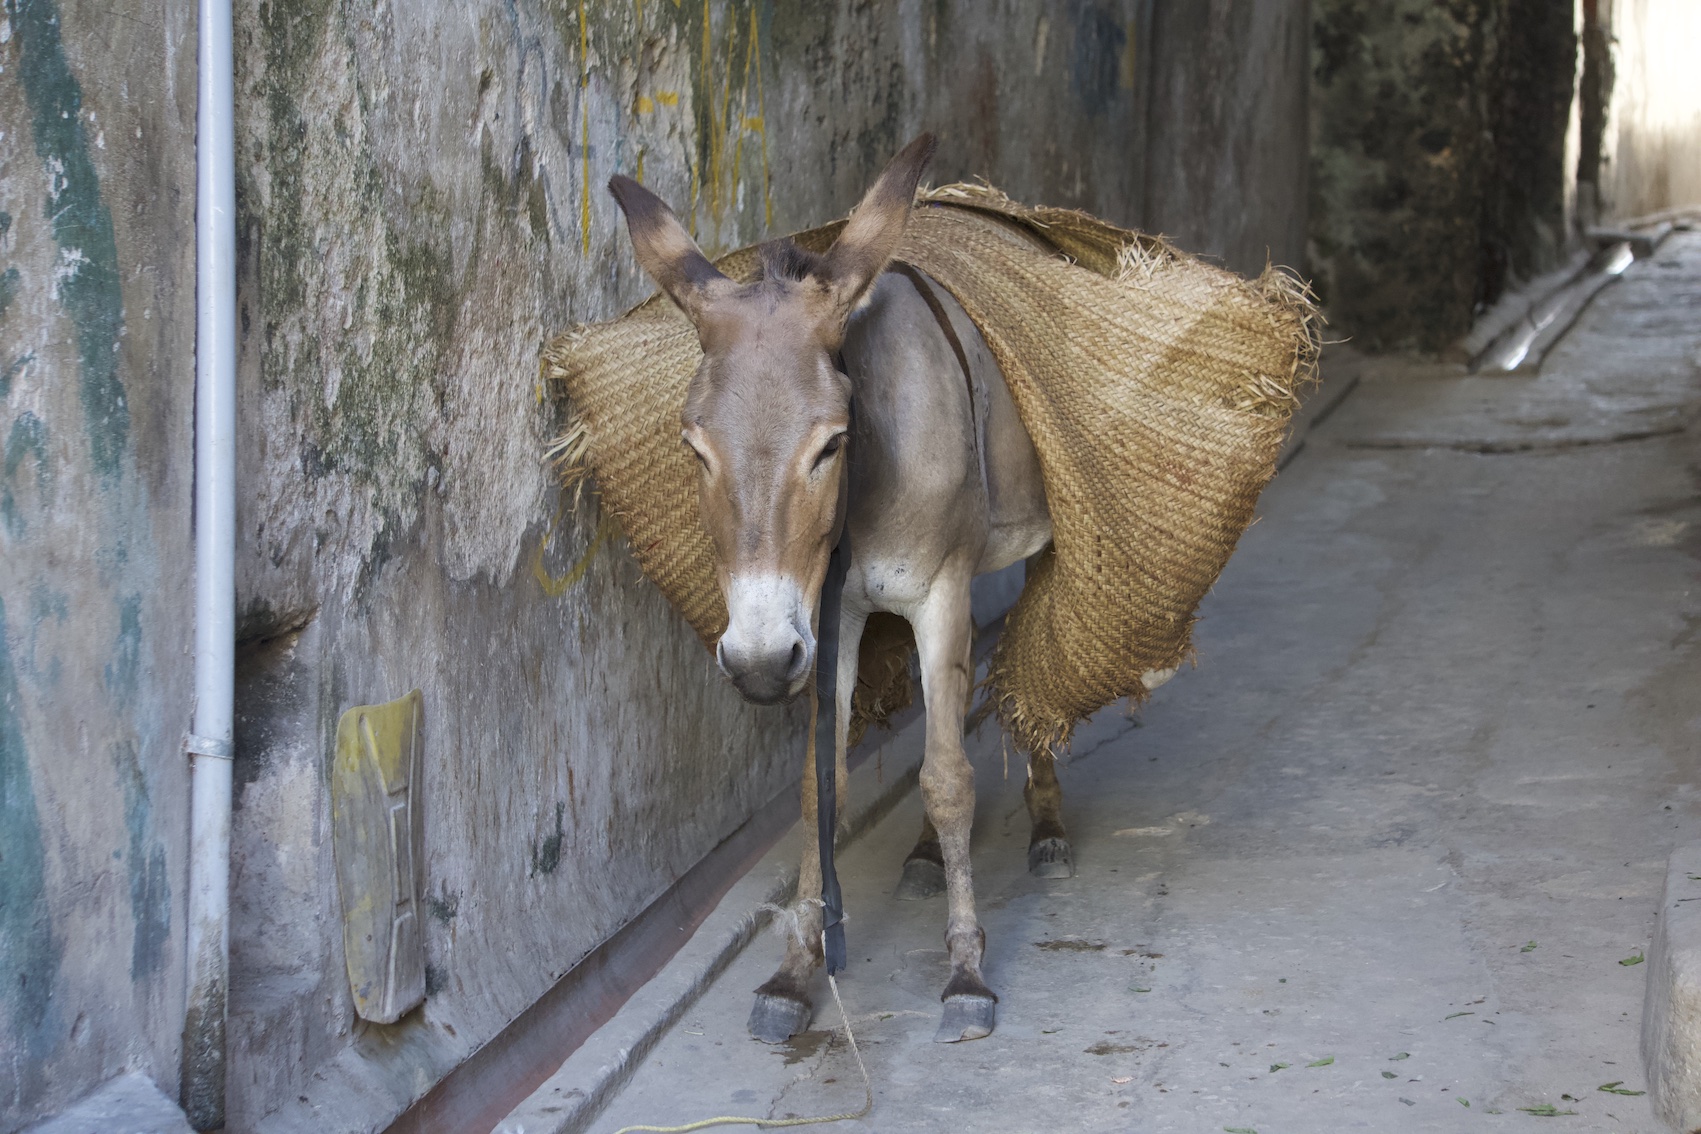 Donkey carrying bags on the streets of Lamu island Old Town